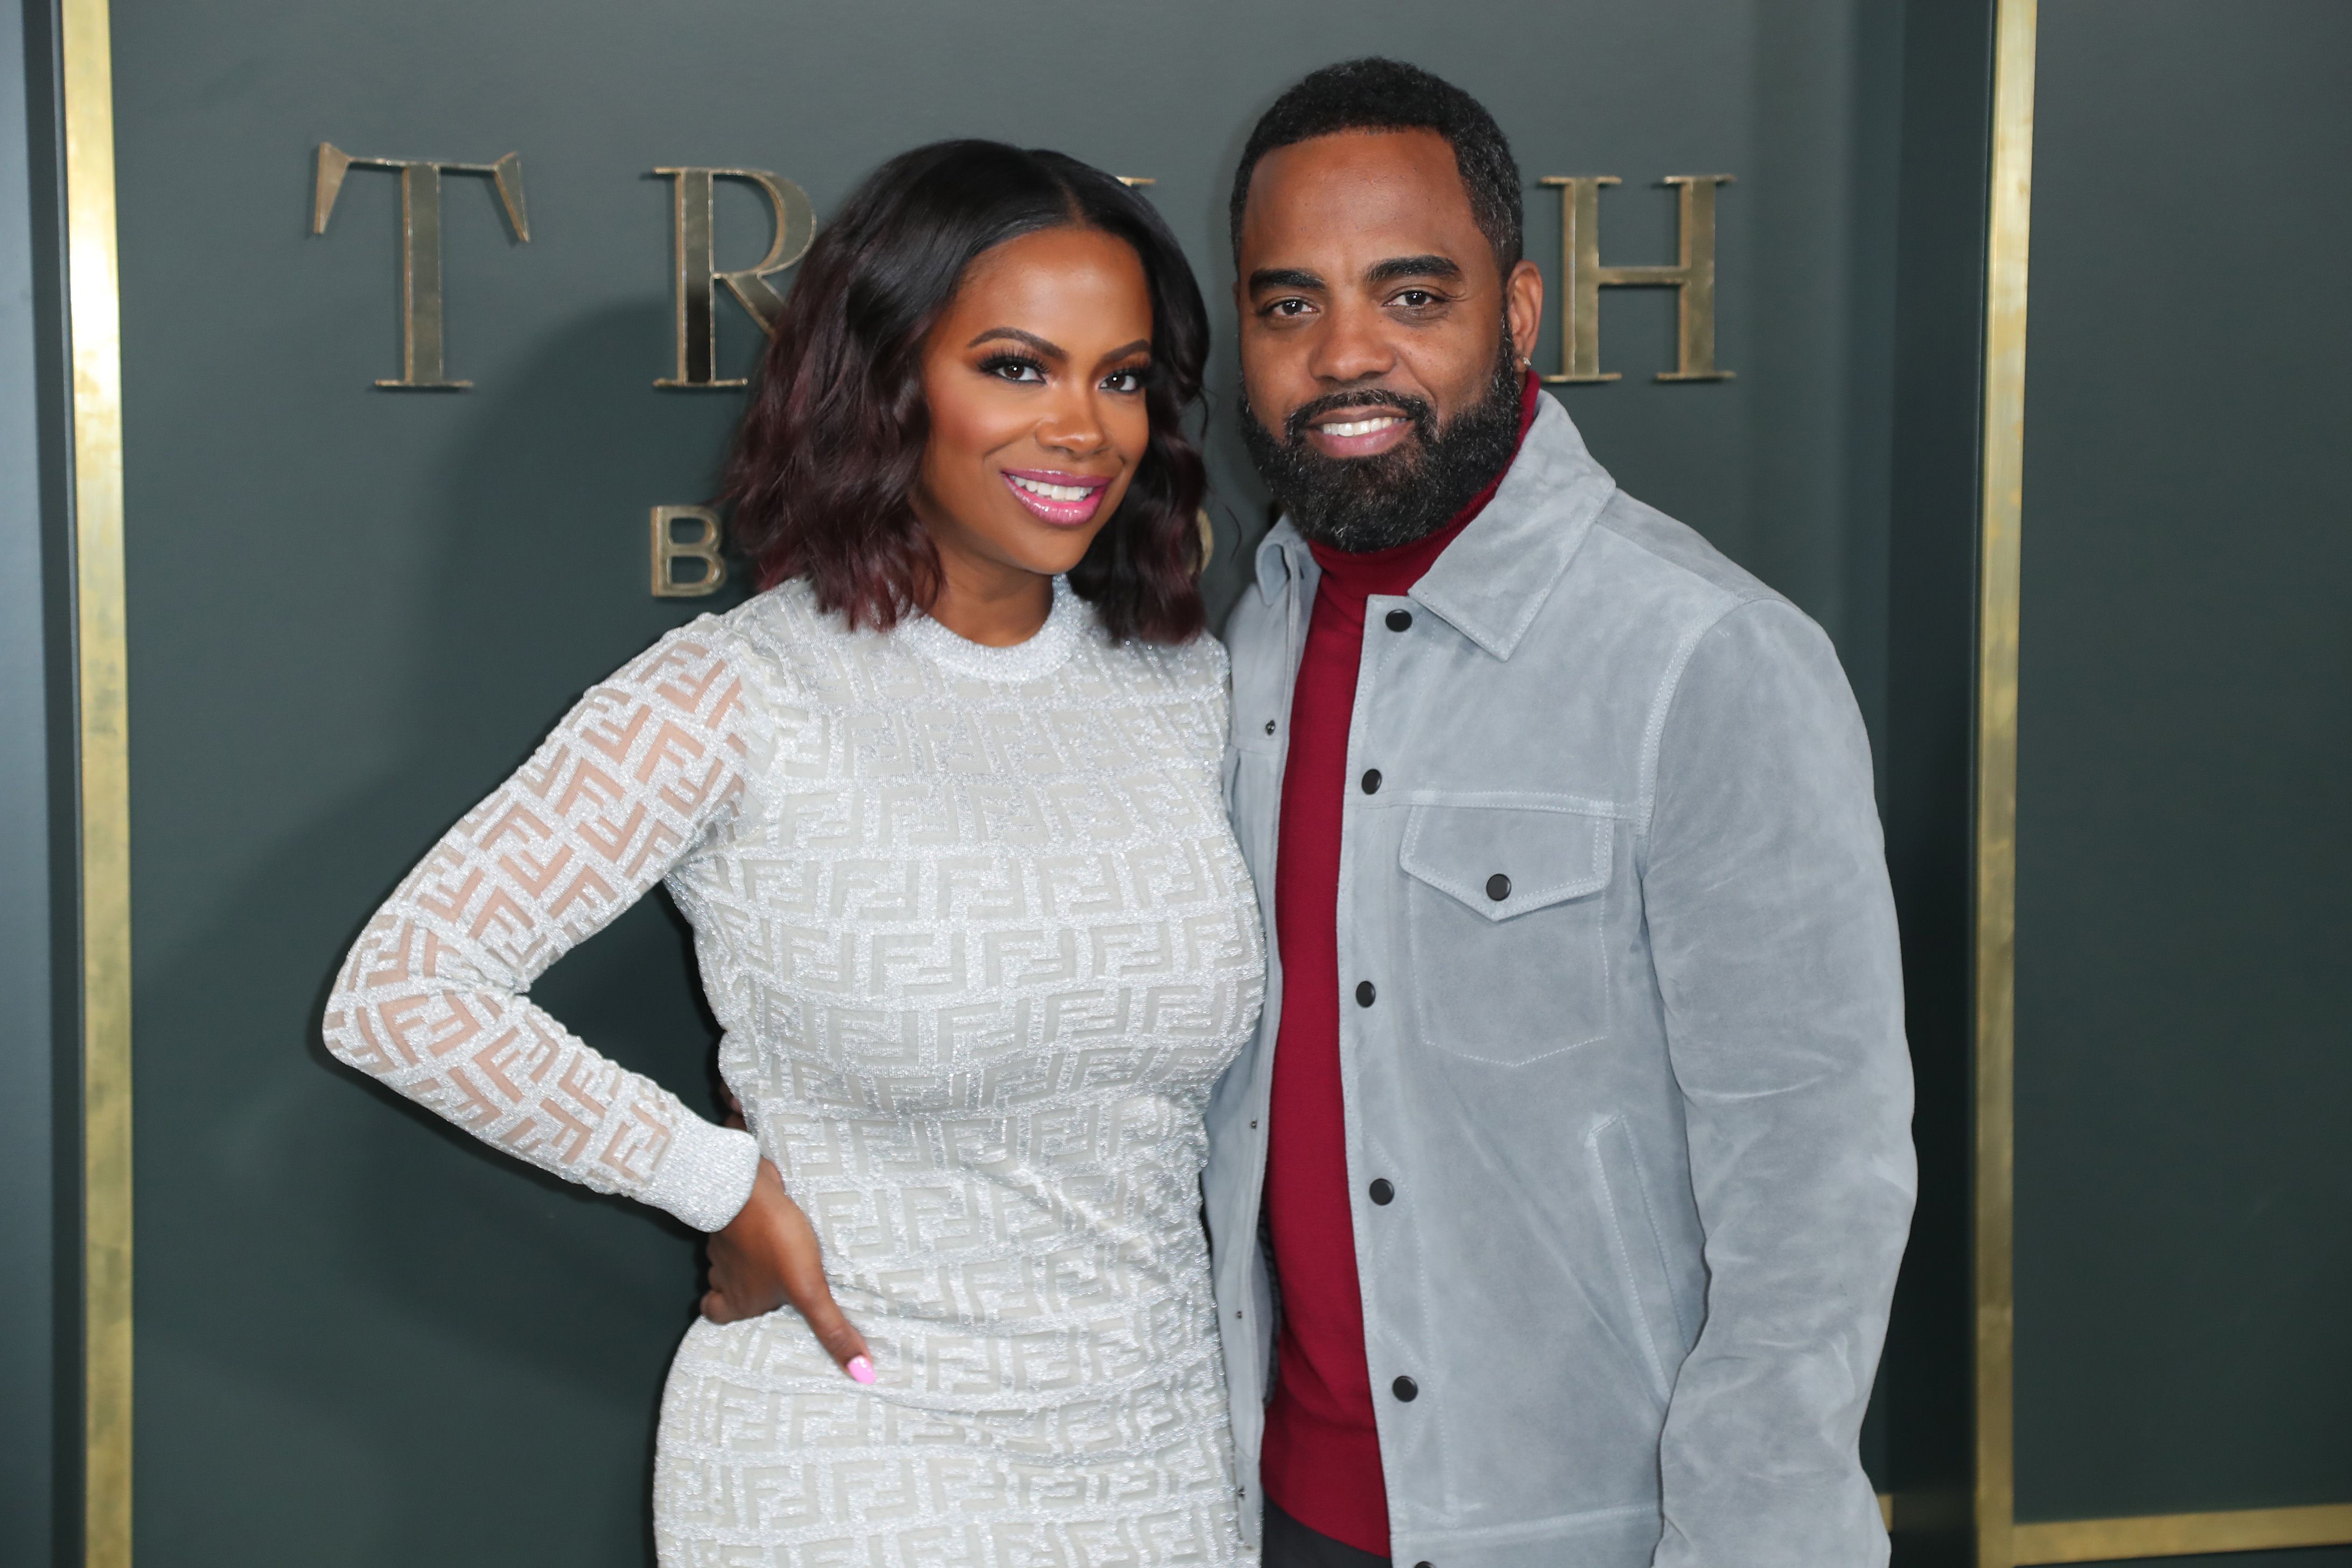 Kandi Burruss and Todd Tucker at the premiere of Apple TV+'s "Truth Be Told" at AMPAS Samuel Goldwyn Theater on November 11, 2019 | Photo: Getty Images